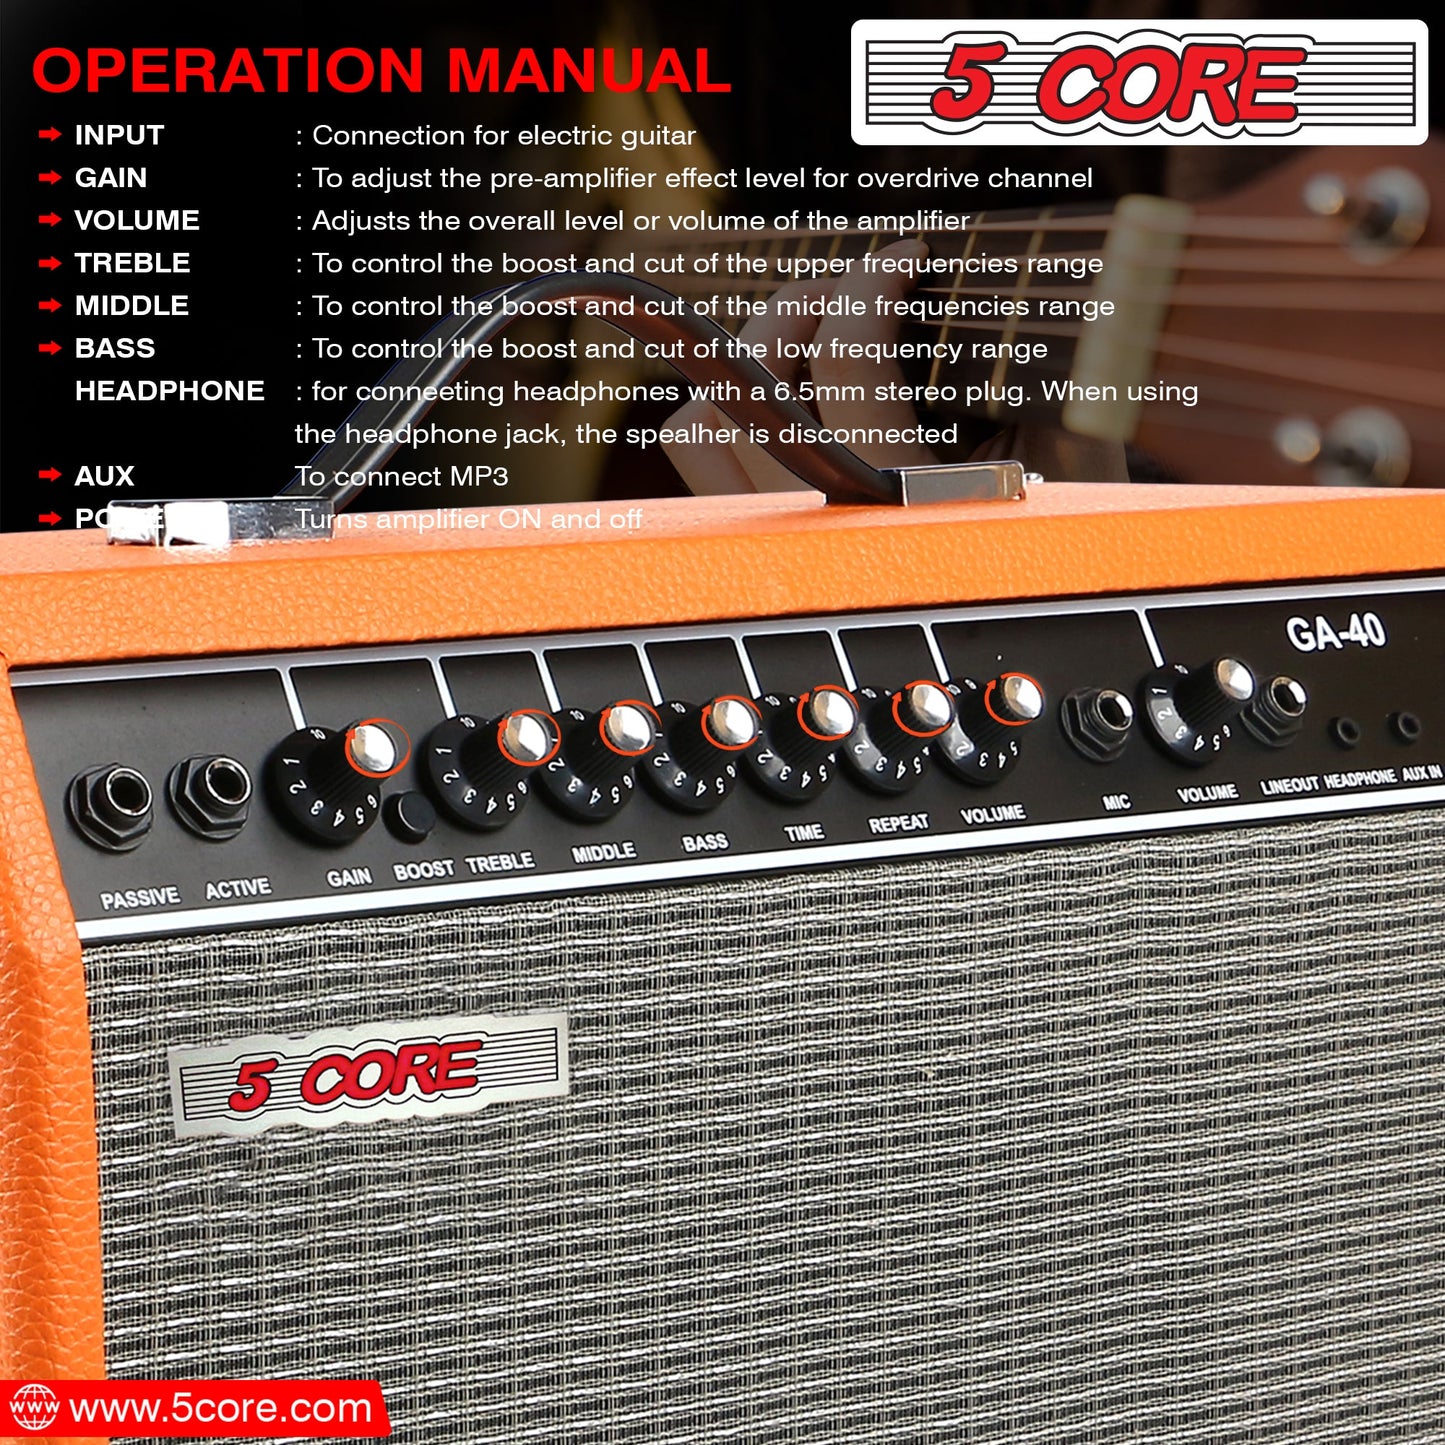 5 Core 40W Guitar Amplifier Orange - Clean and Distortion Channel - Electric Amp with Equalization and AUX Line Input - for Recording Studio, Practice Room, Small Courtyard- GA 40 ORG-7